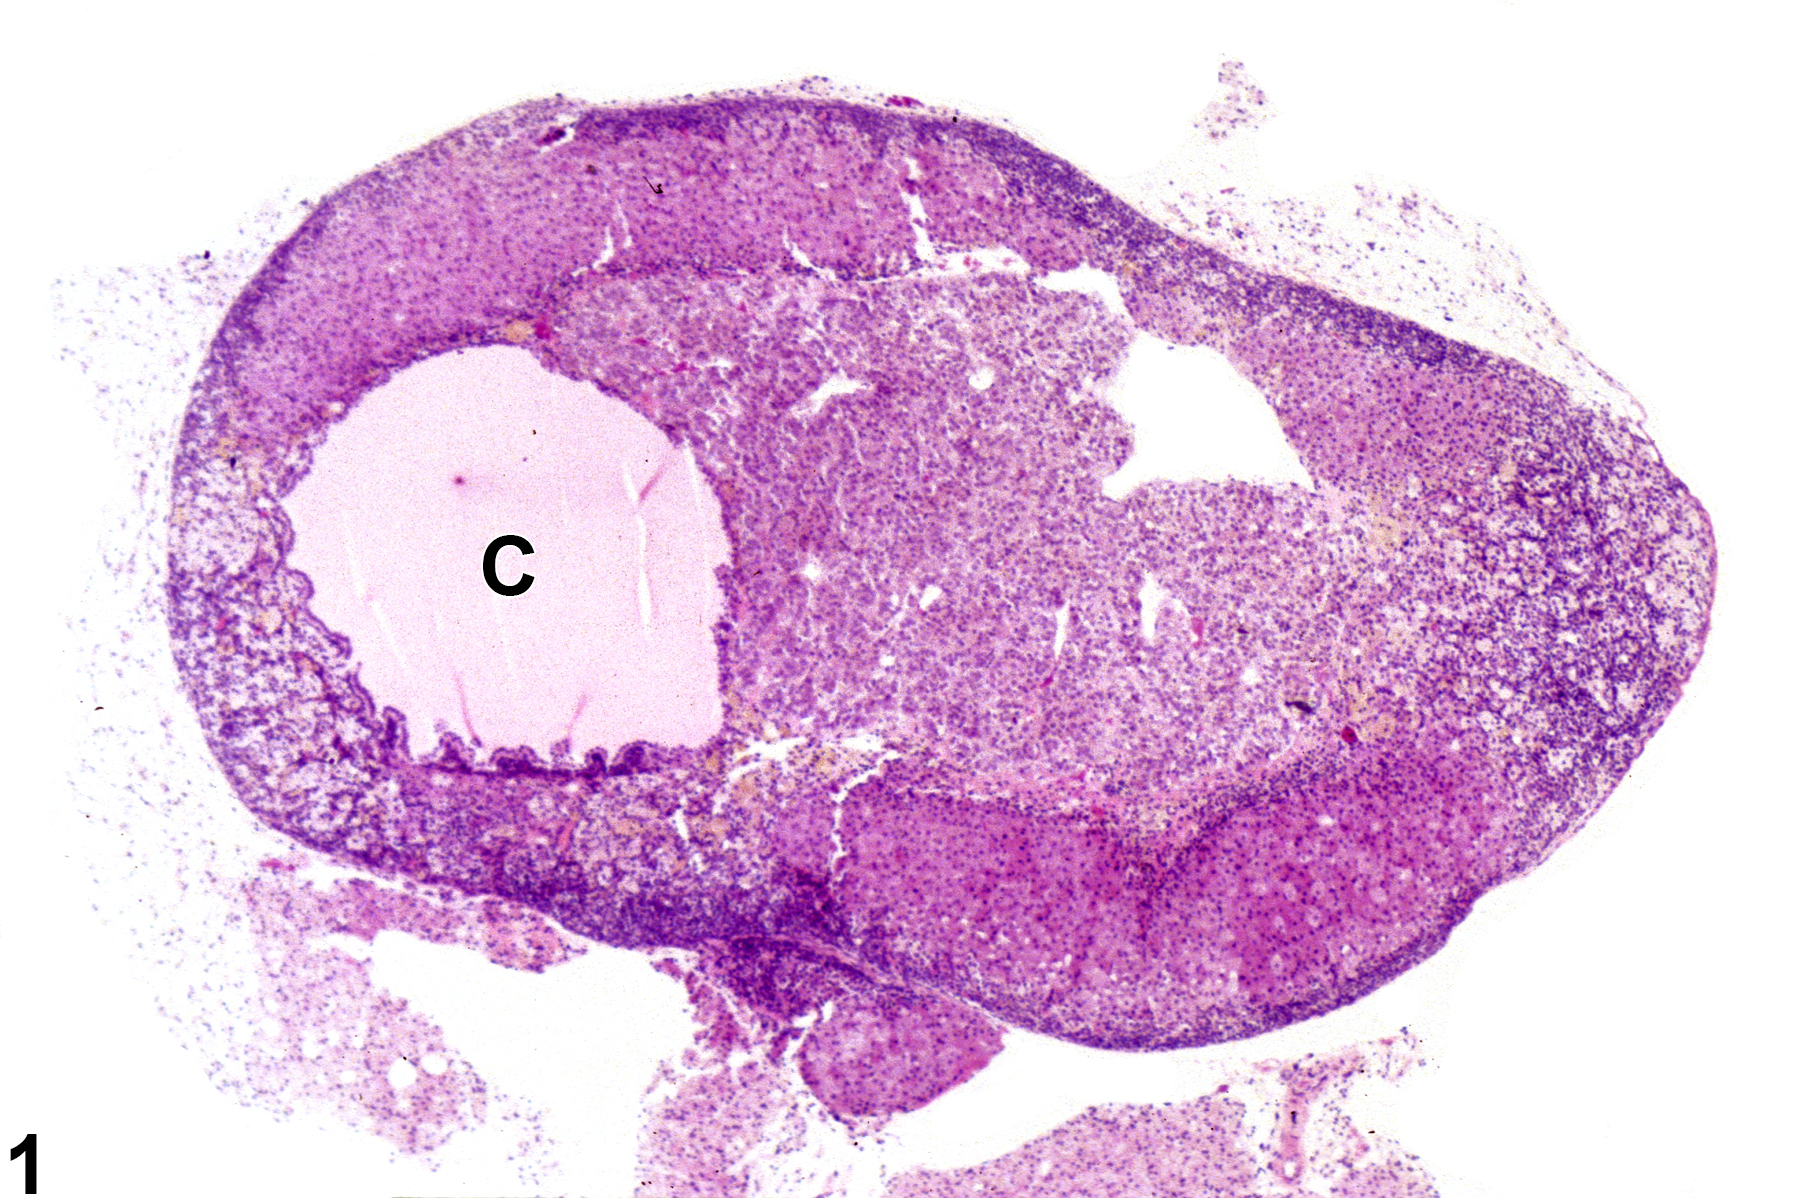 Image of cyst in the adrenal gland from a female B6C3F1/N mouse in a chronic study